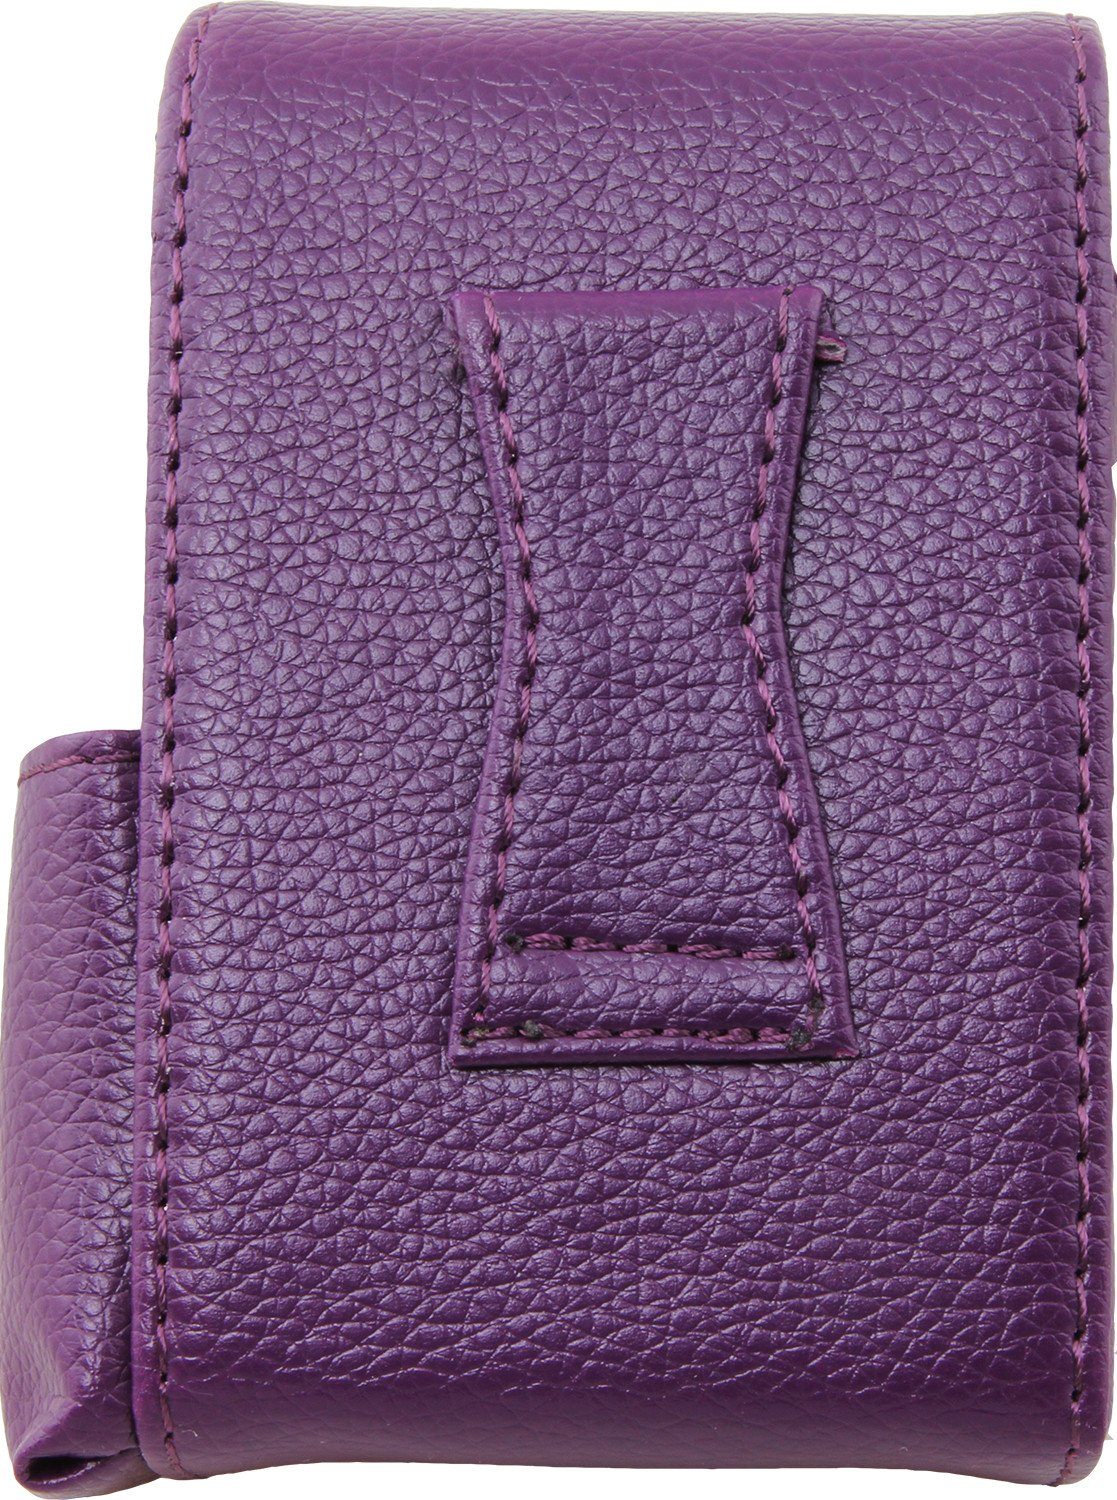 2 COLOR PAIR 100% Leather Cigarette Coin Pouch Fit 100s, King BURGUNDY+  PURPLE